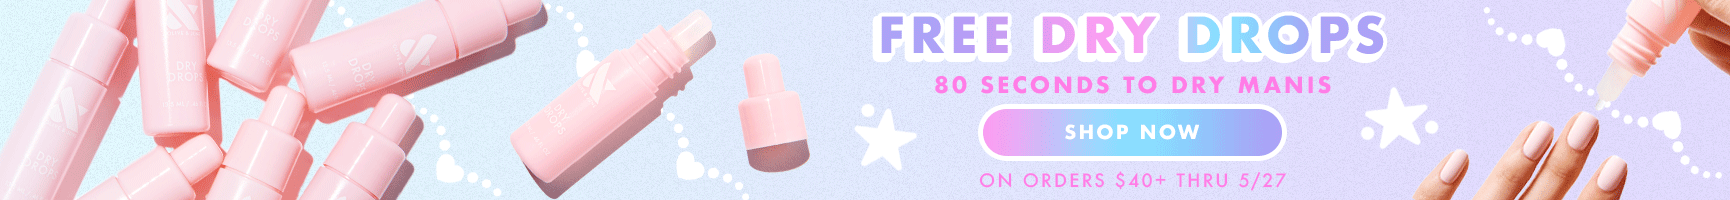 Free dry drops, 60 seconds to dry manis - SHOP NOW *on orders $40+ through 5/27.